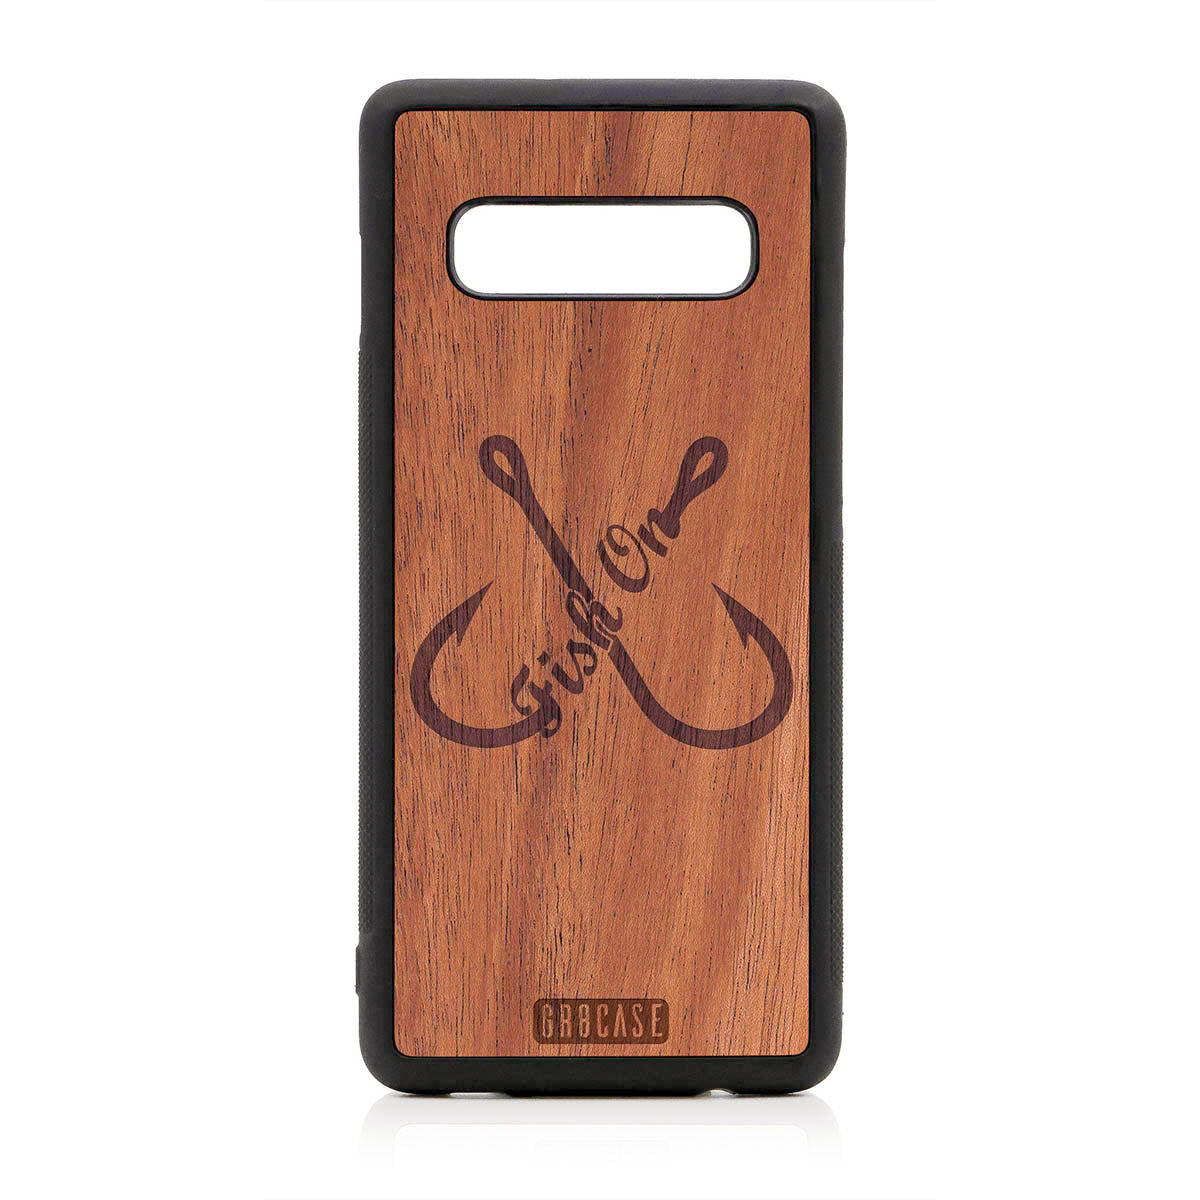 Fish On (Fish Hooks) Design Wood Case For Samsung Galaxy S10 Plus by GR8CASE